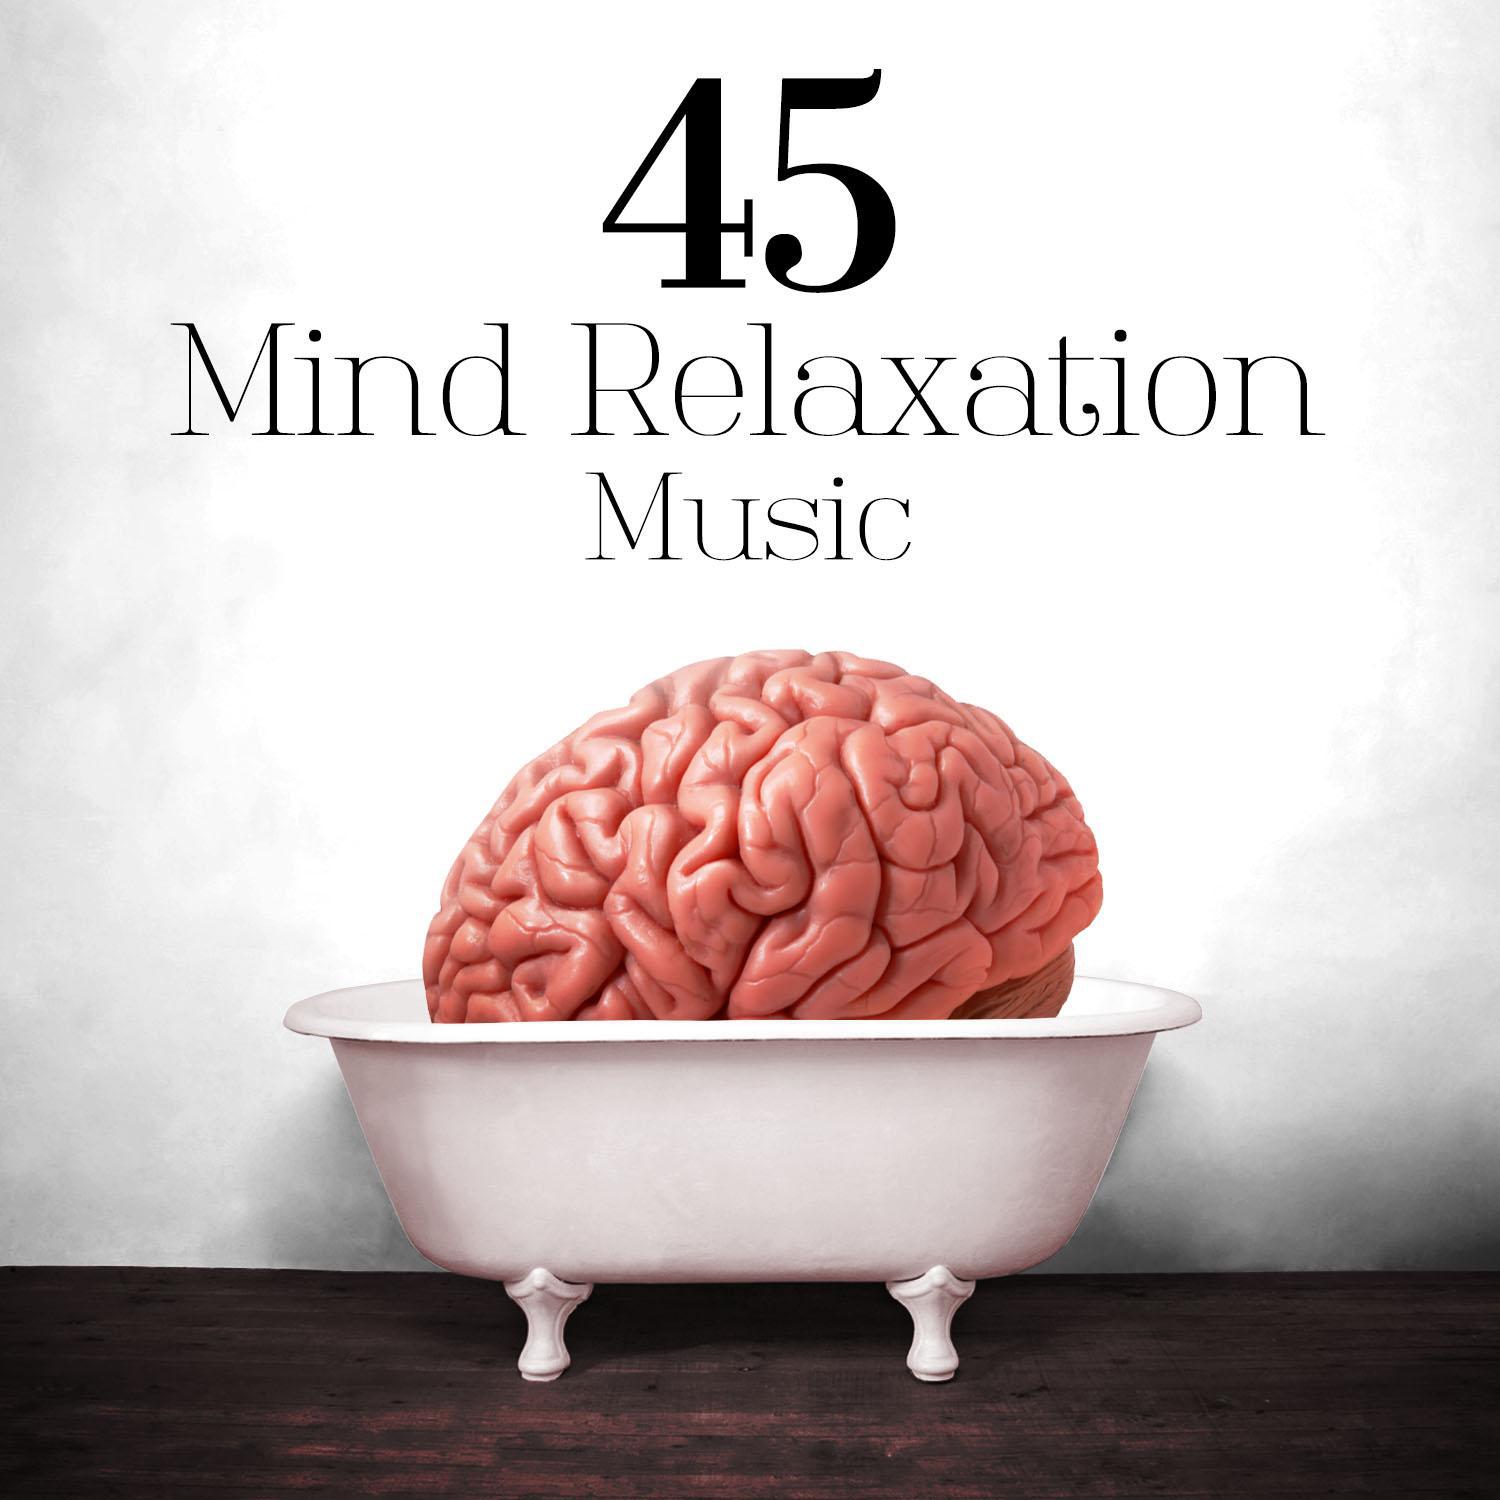 45 Mind Relaxation Music专辑